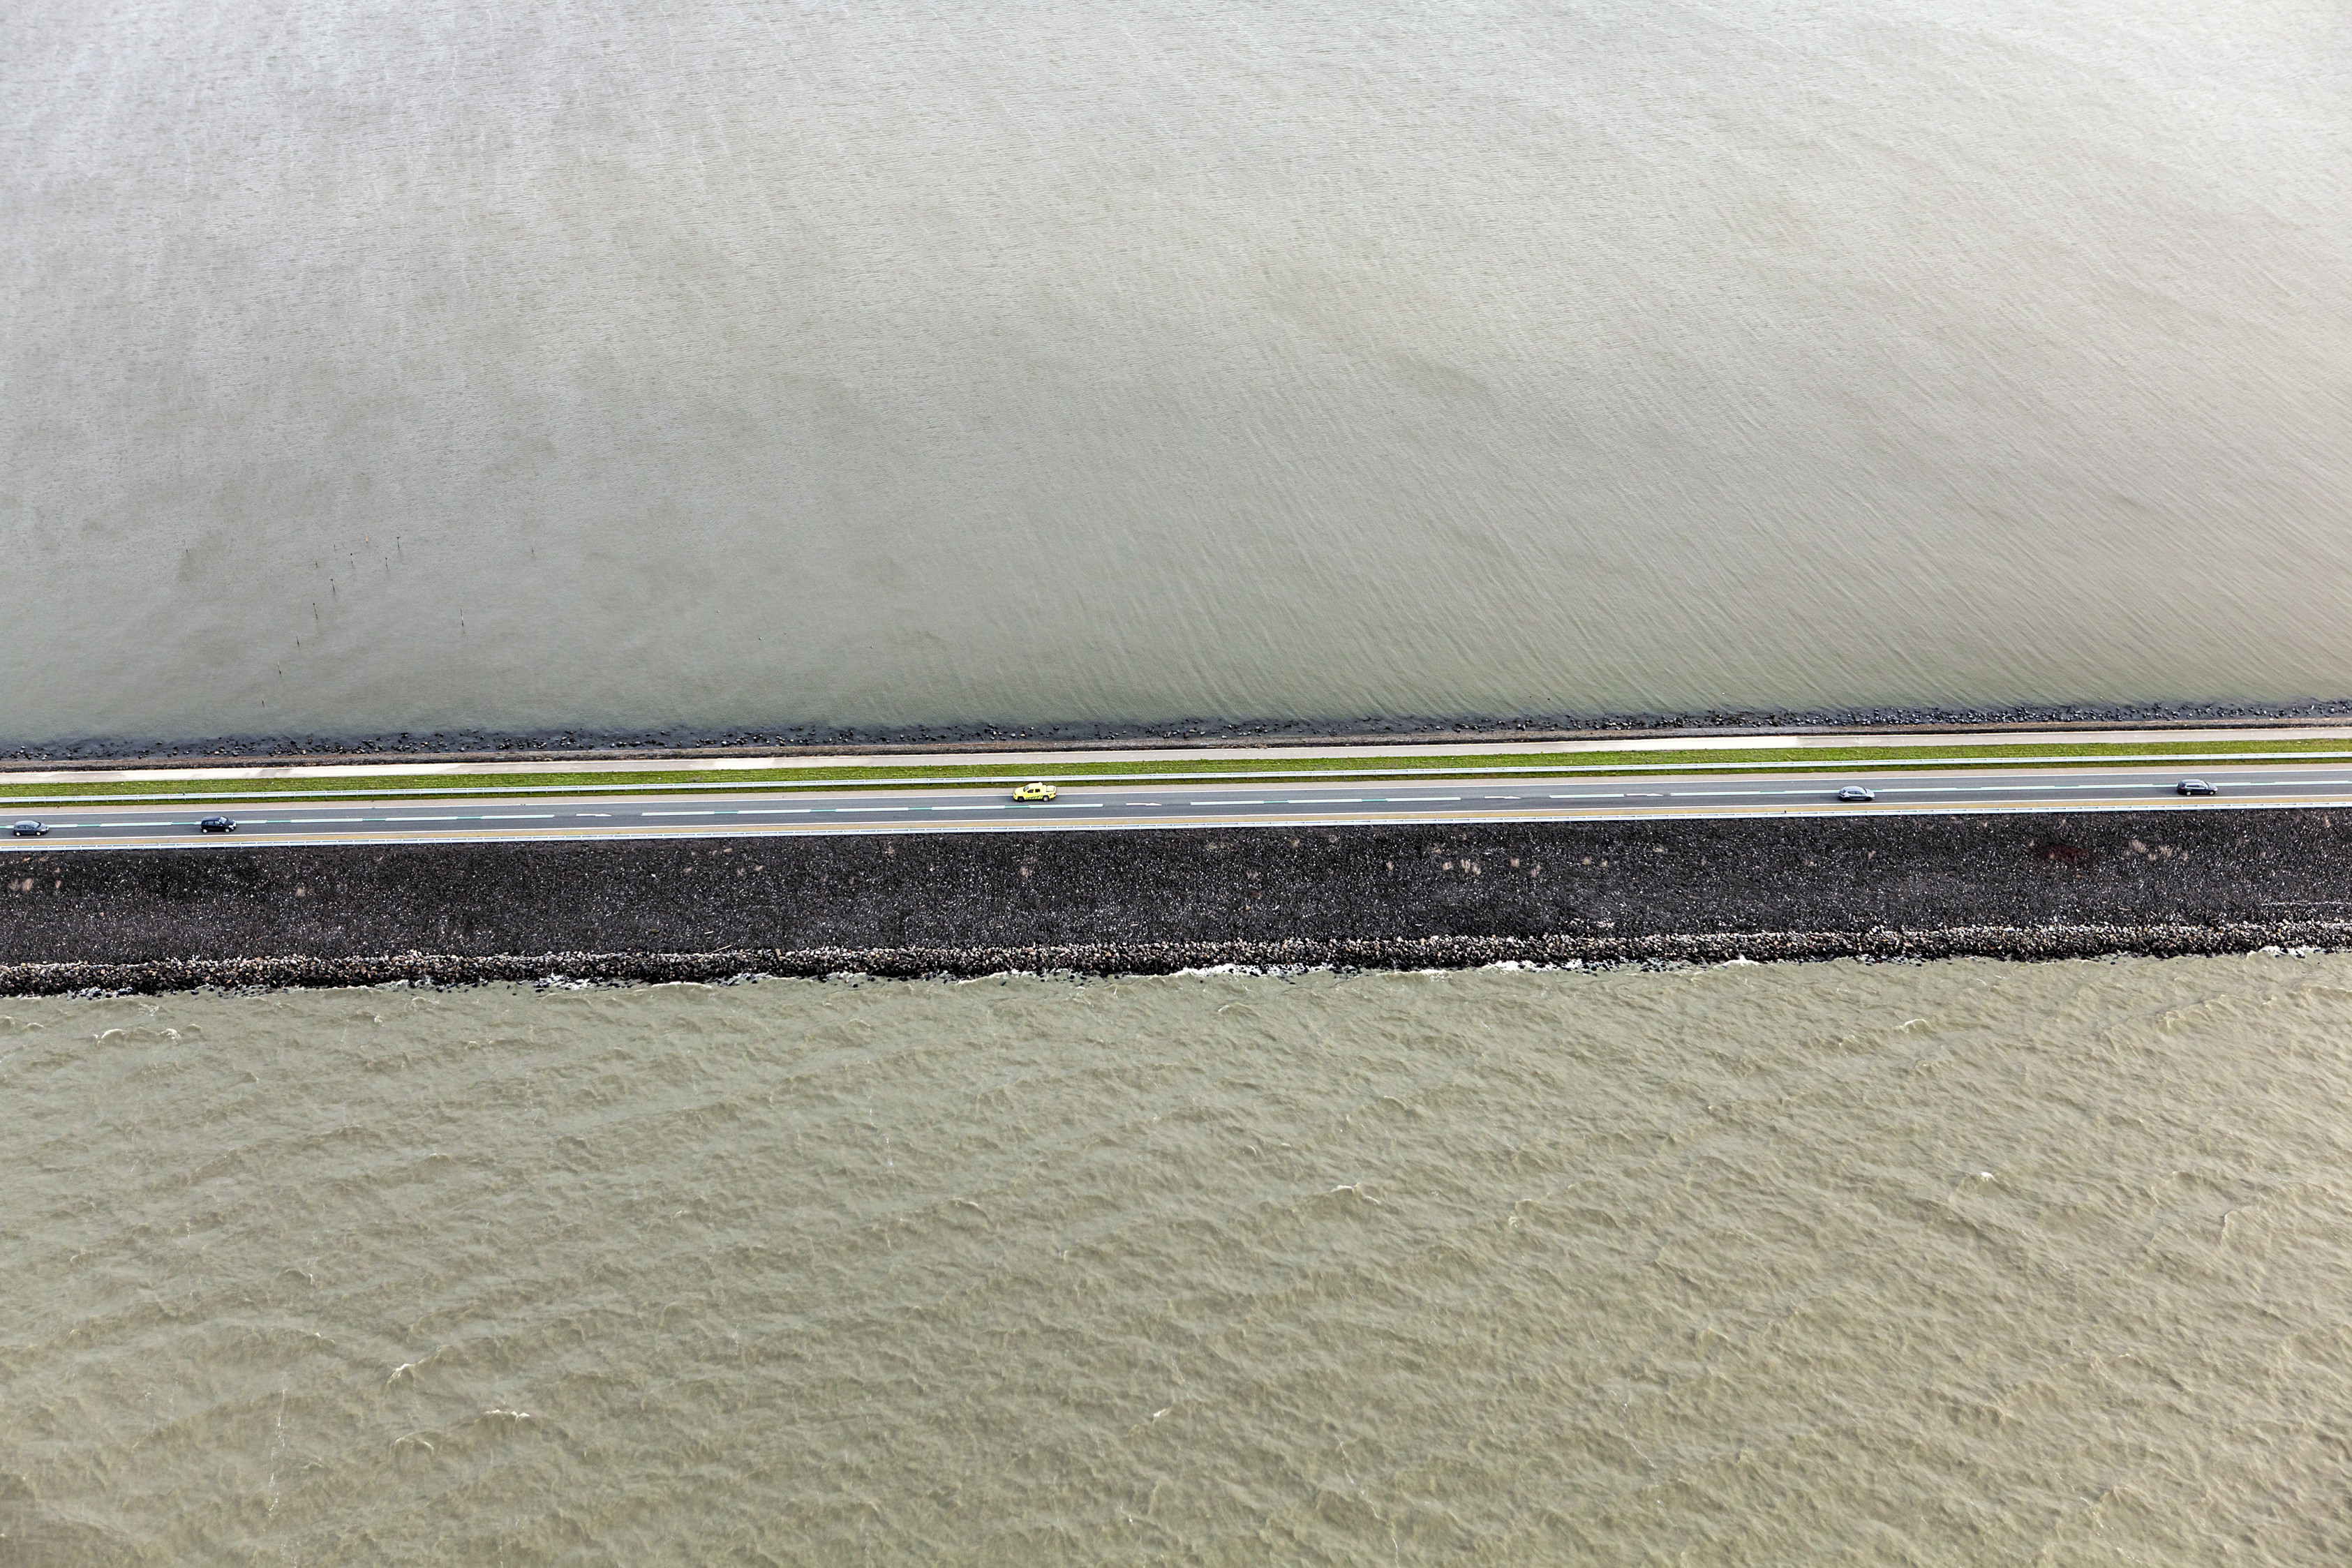 A stretch of the Houtrib dike that divides the Markermeer and IJsselmeer lakes